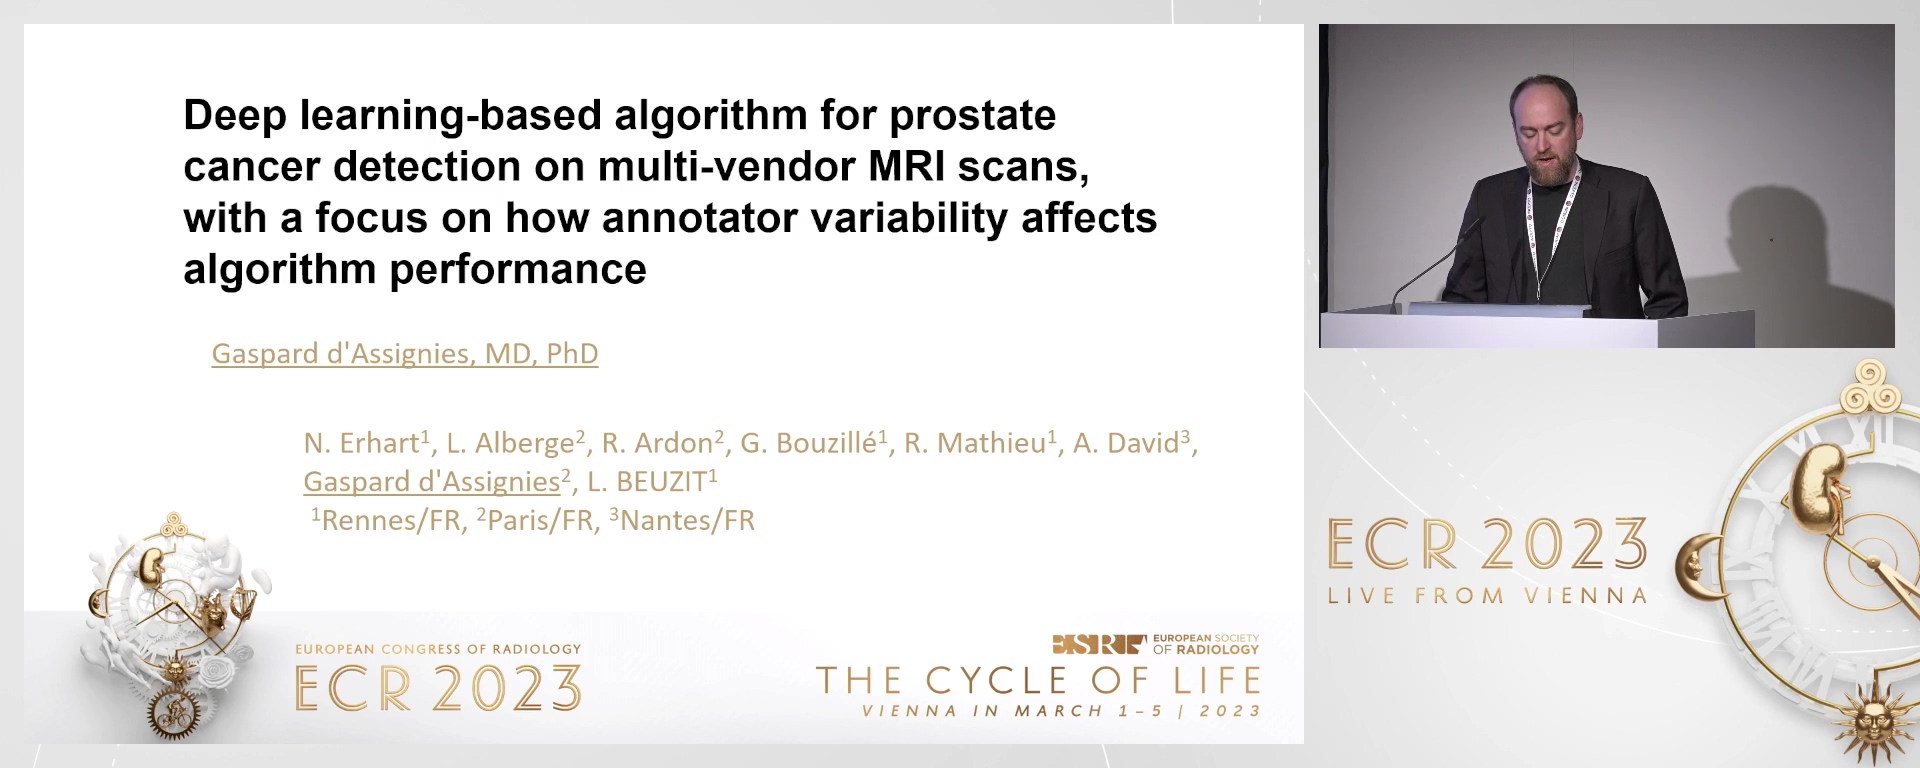 Deep learning-based algorithm for prostate cancer detection on multi-vendor MRI scans, with a focus on how annotator variability affects algorithm performance - Gaspard d'Assignies, Paris / FR